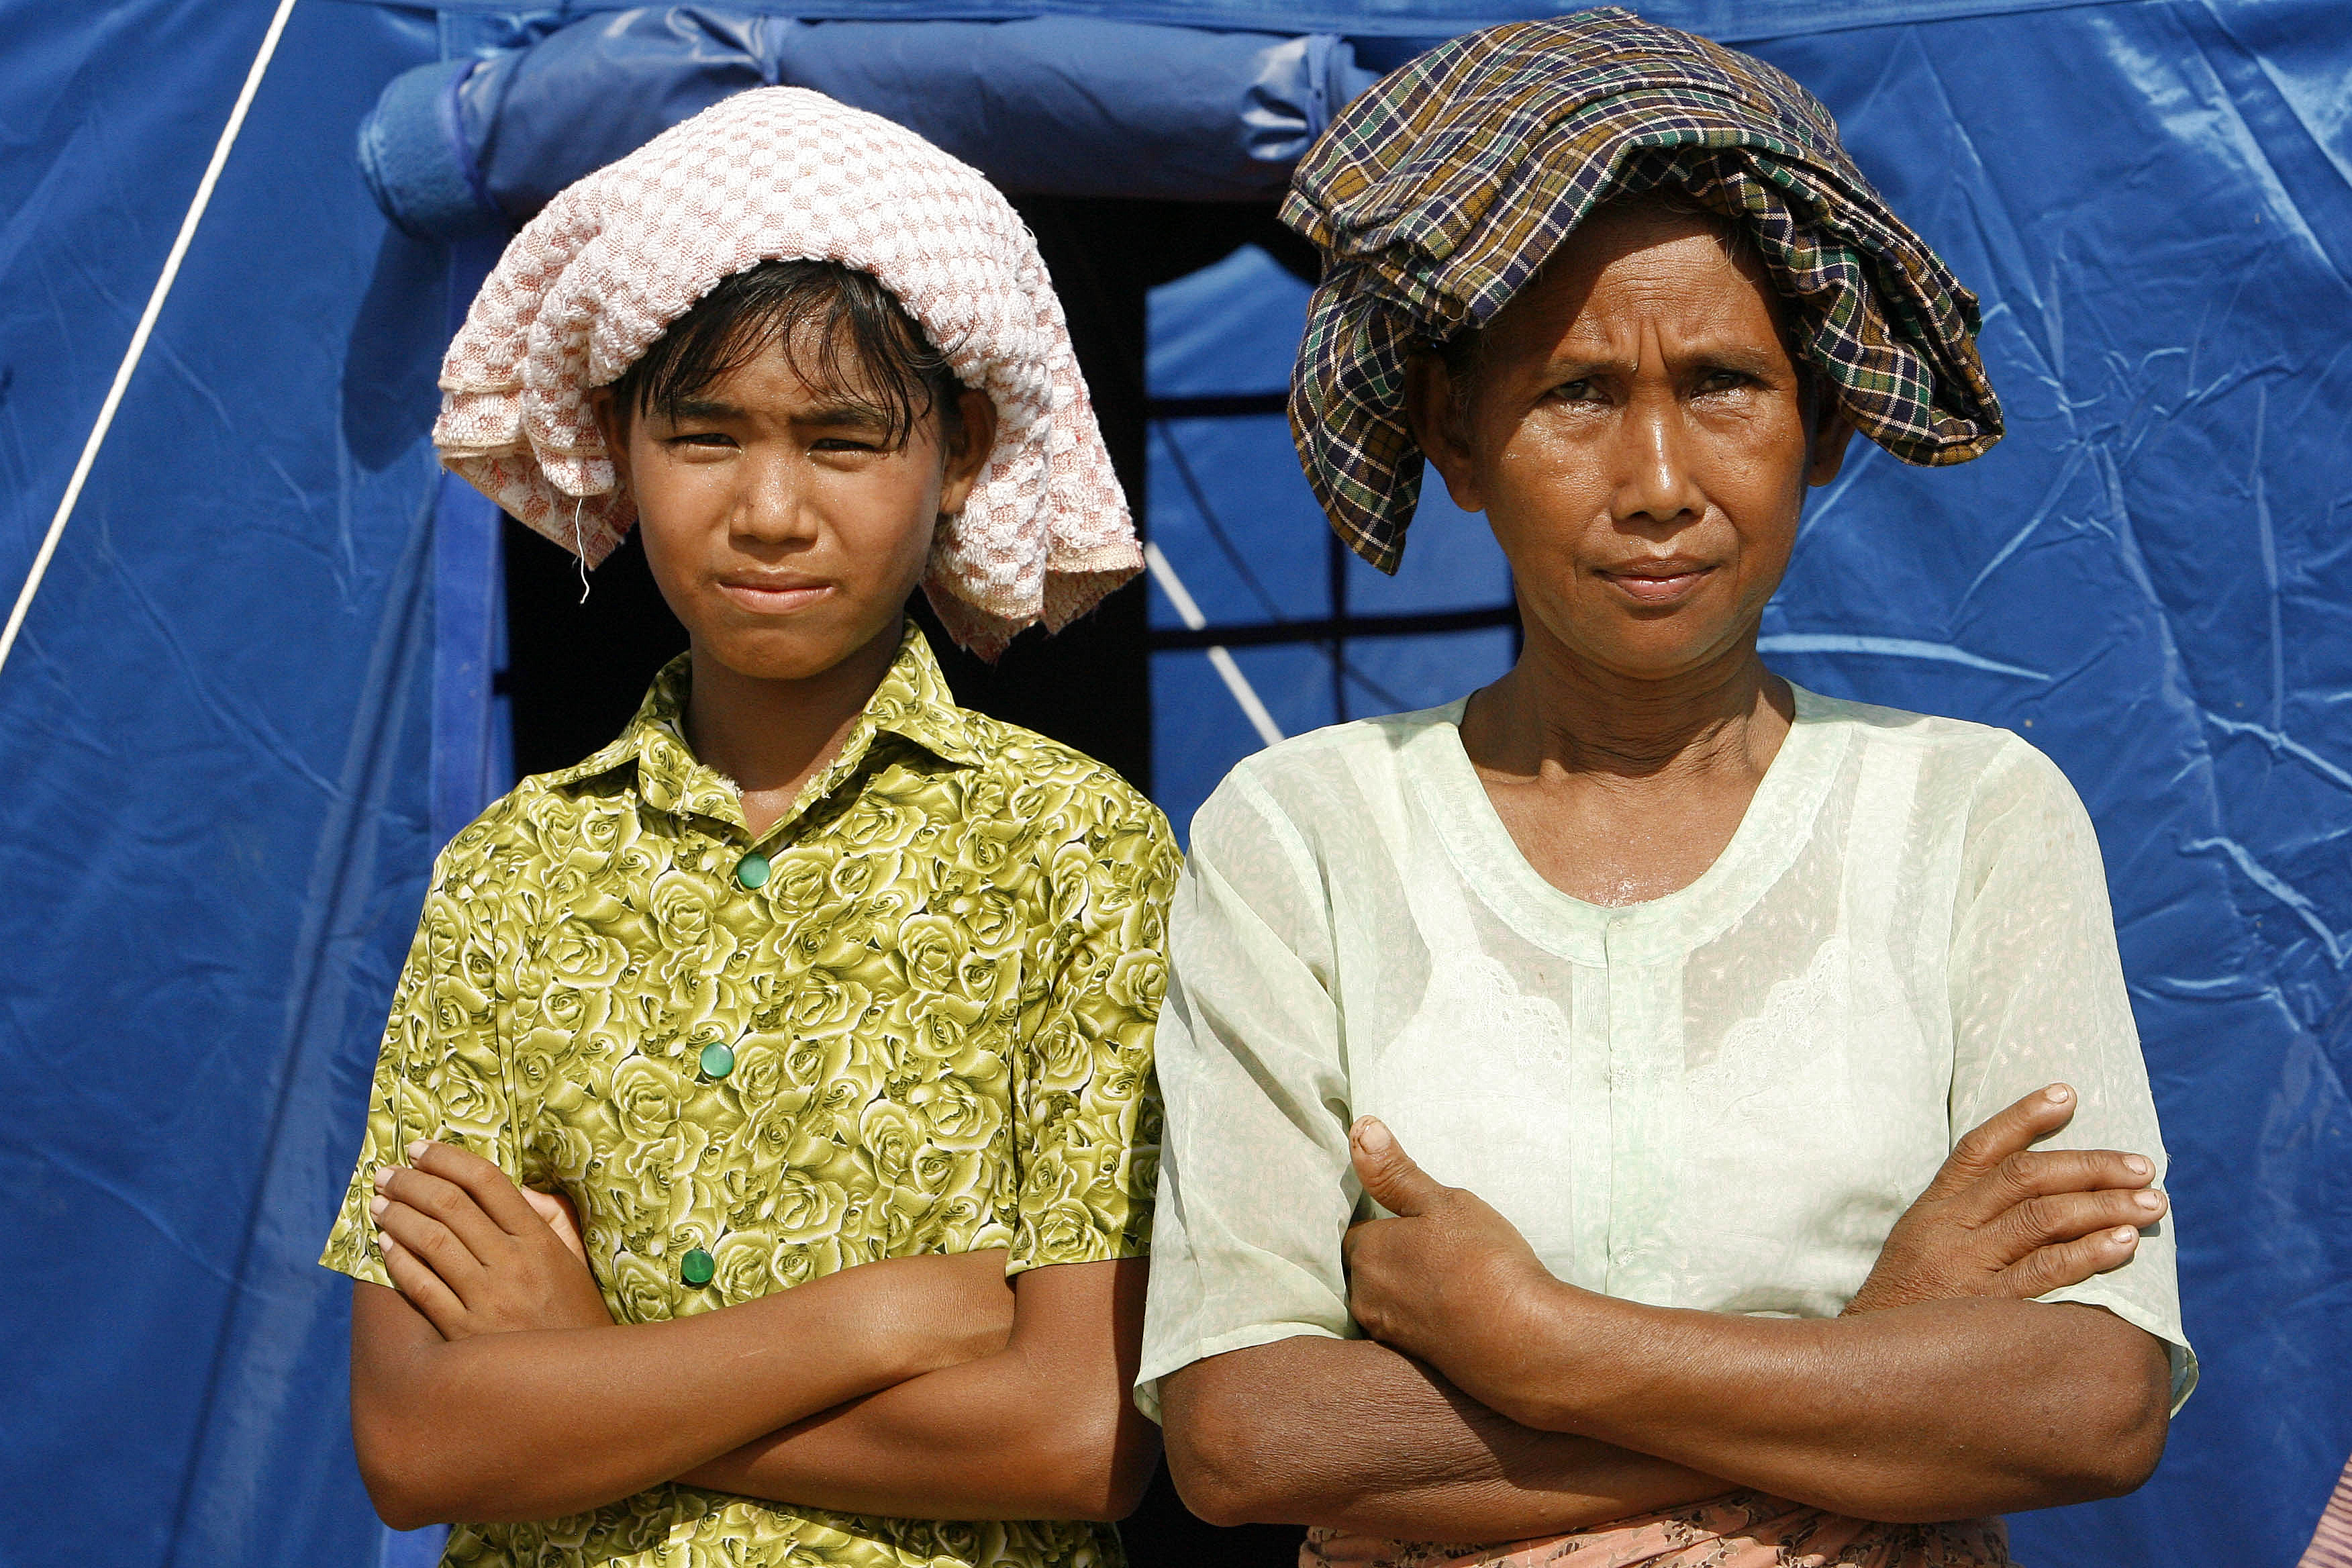 A woman and a young child stand in front of a tent in the sun with cloth on their heads.